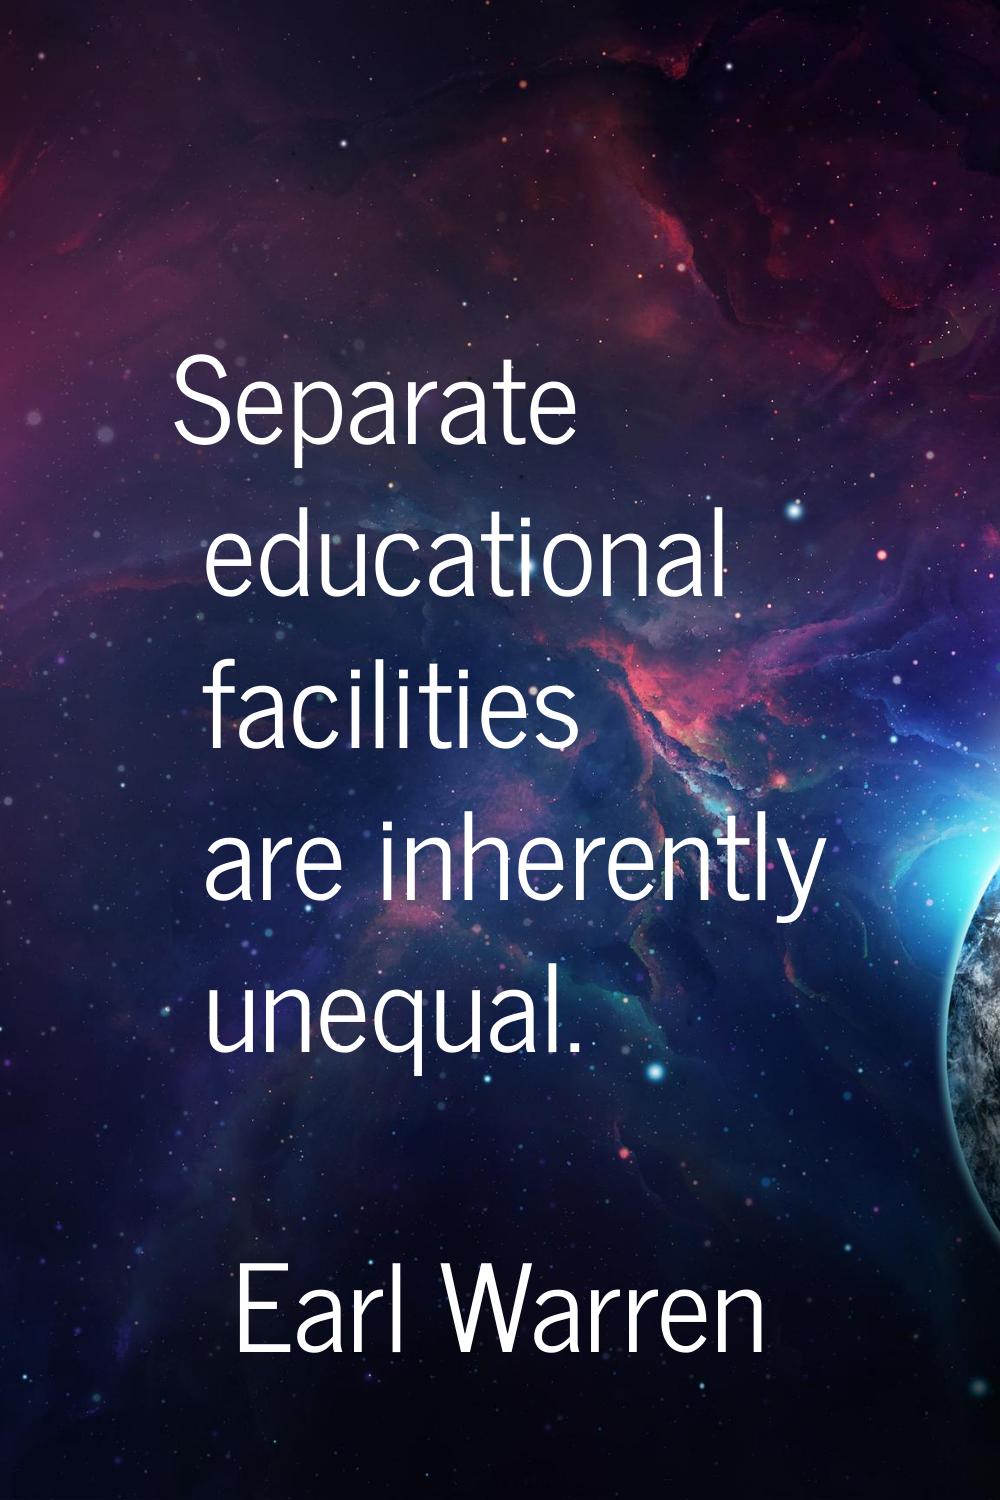 Separate educational facilities are inherently unequal.